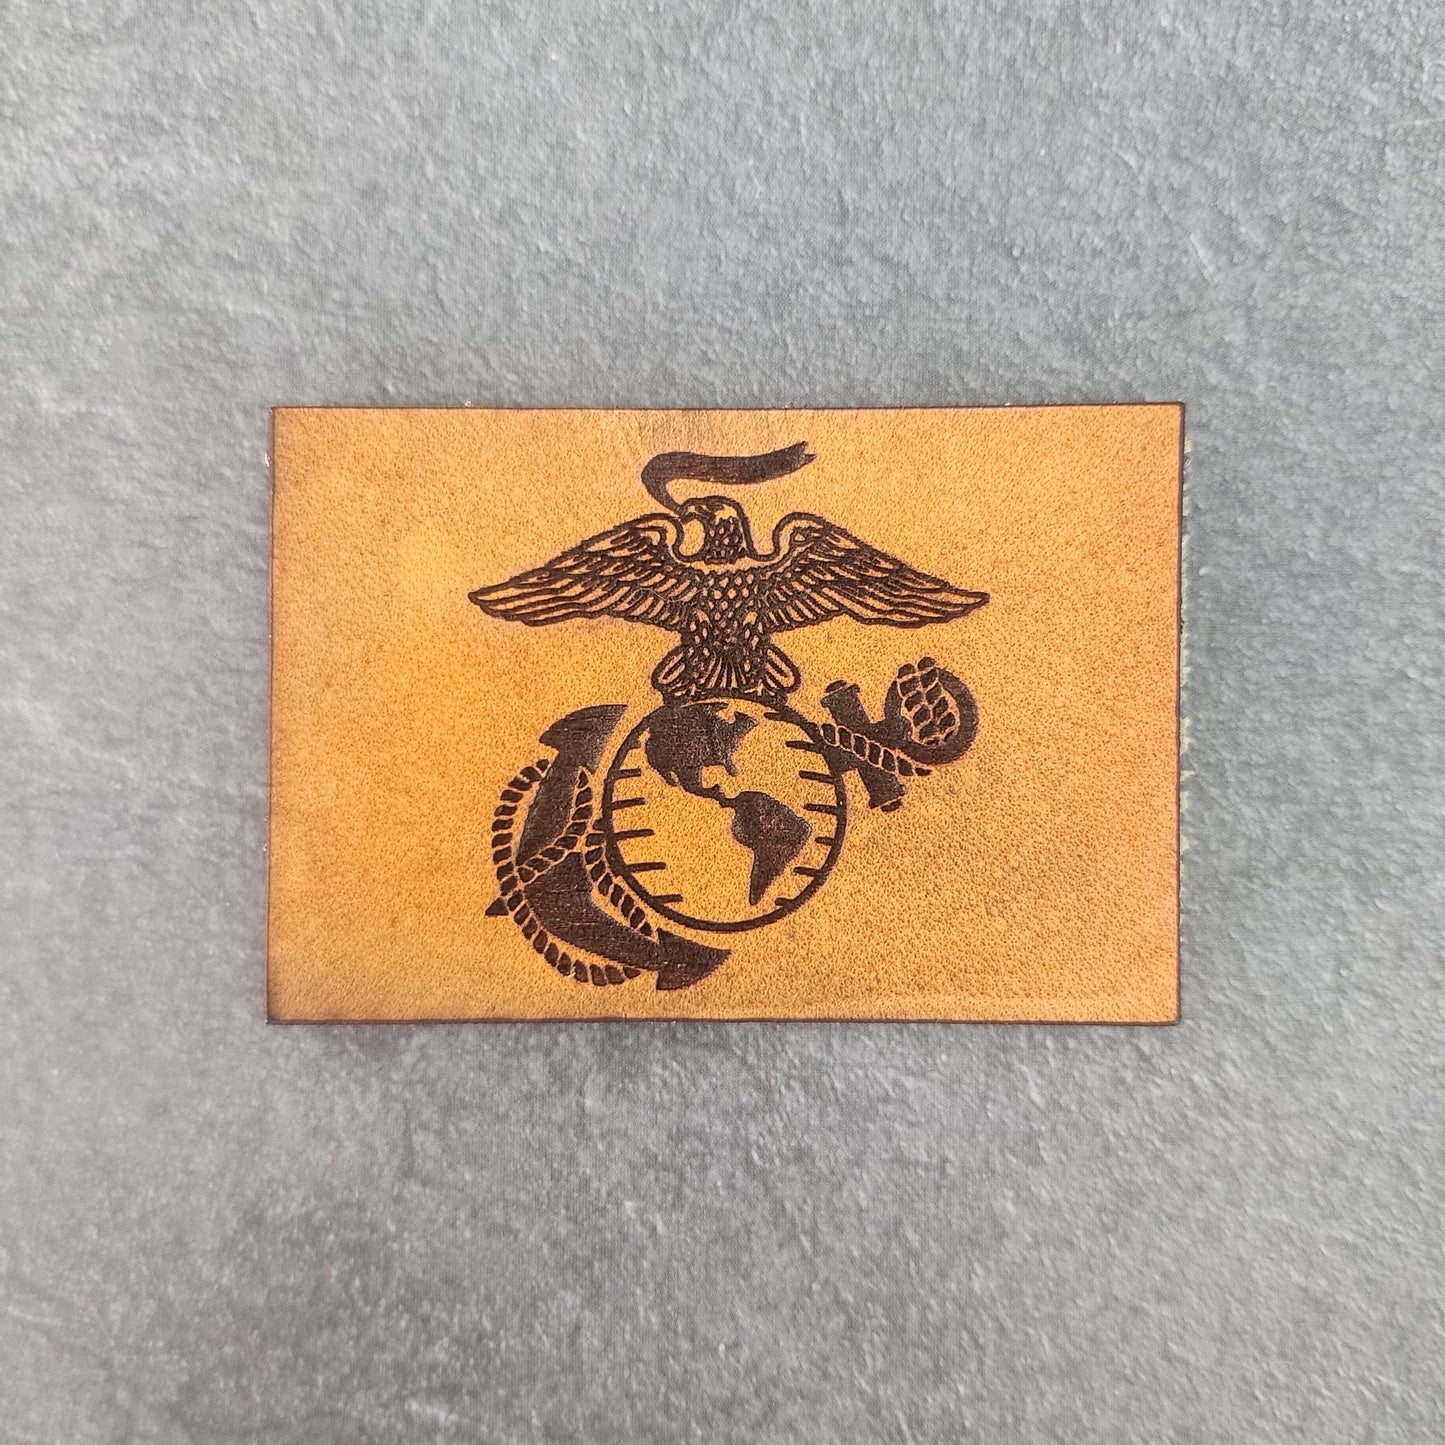 Marine Leather patch